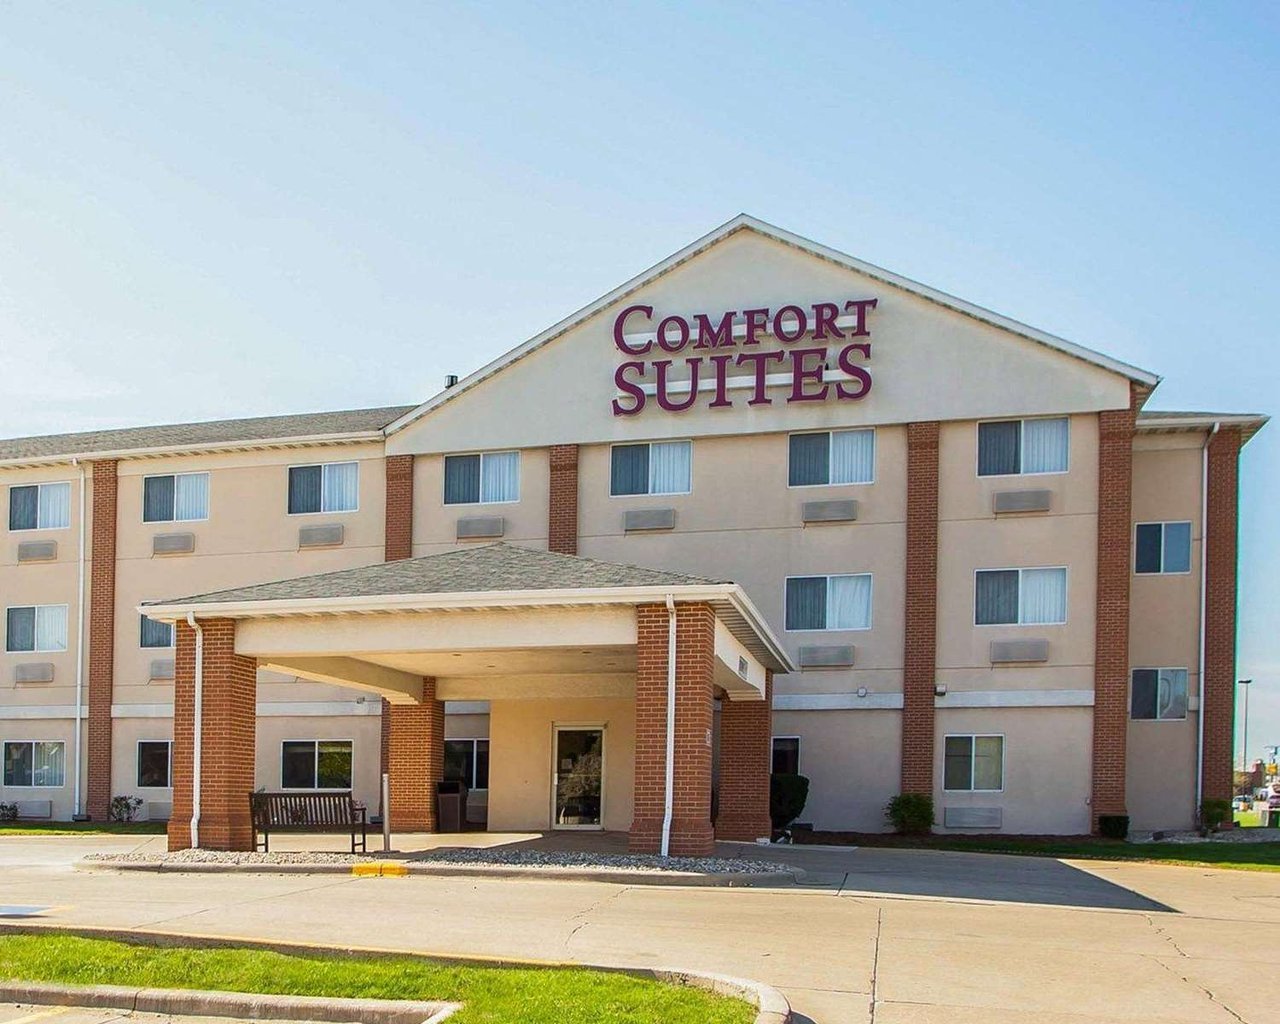 Photo of Comfort Suites Normal University Area, Normal, IL